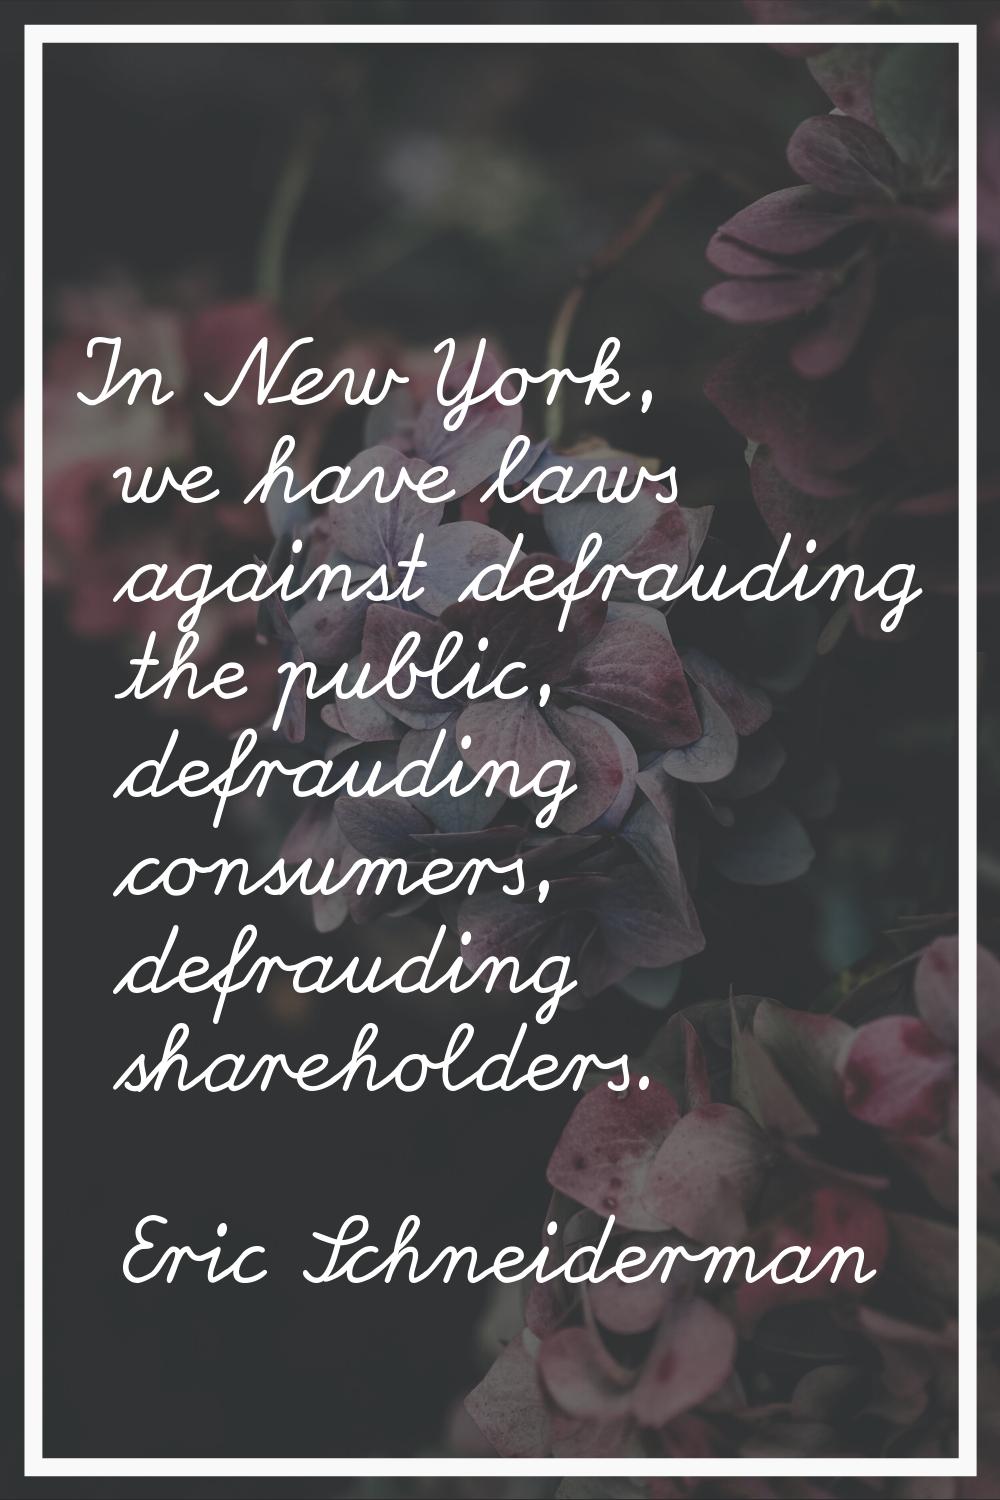 In New York, we have laws against defrauding the public, defrauding consumers, defrauding sharehold